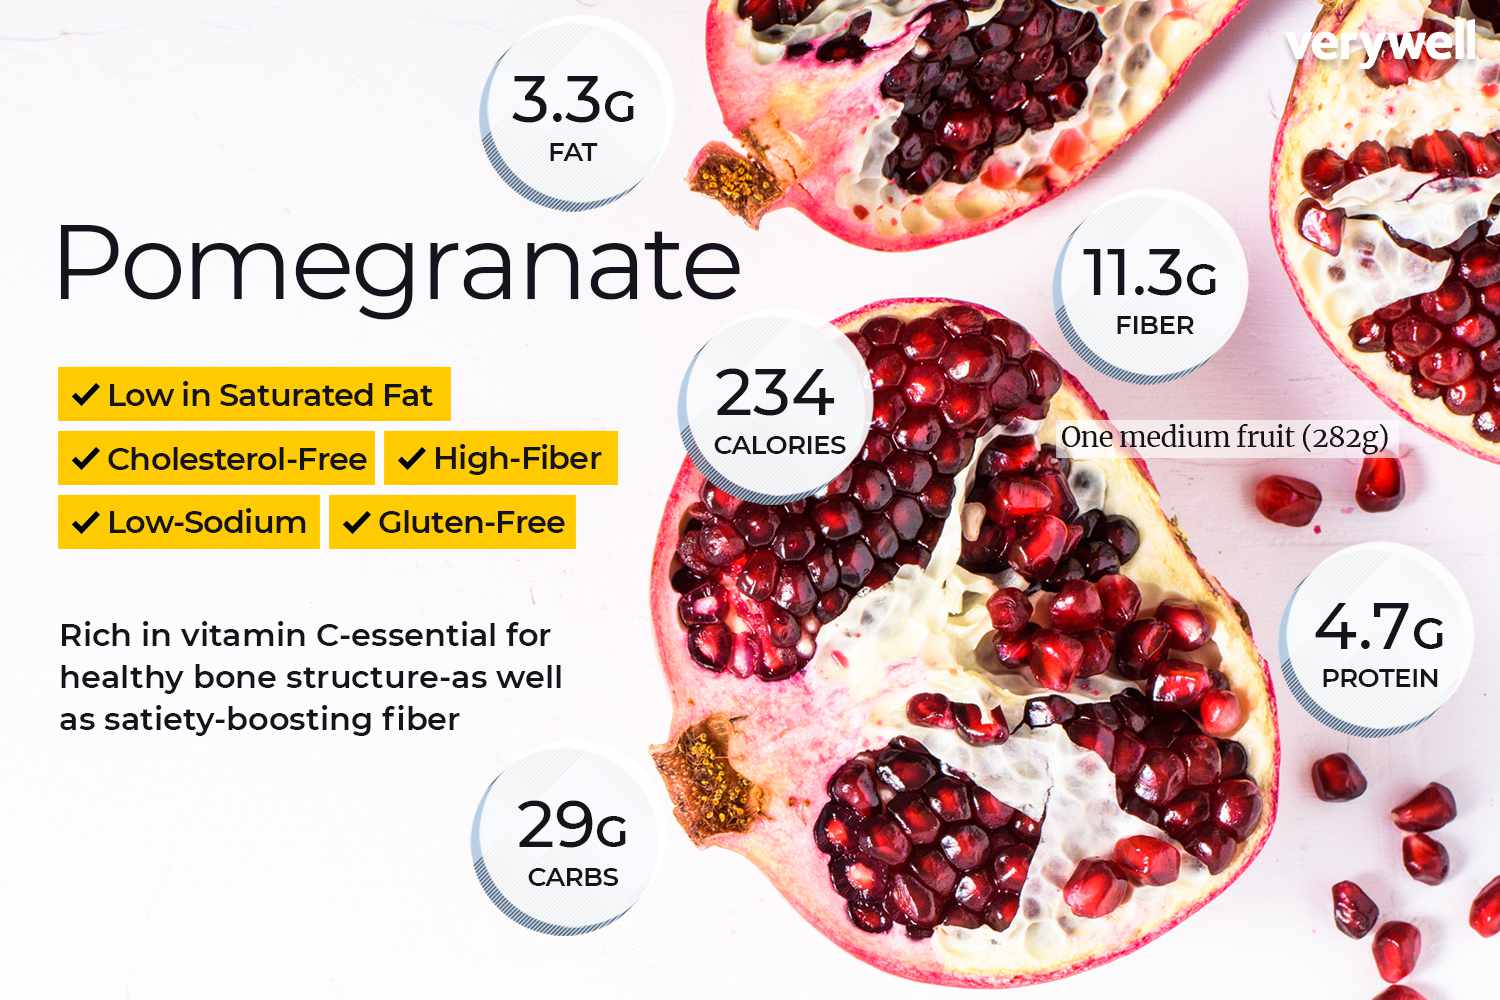 Pomegranate nutrition facts